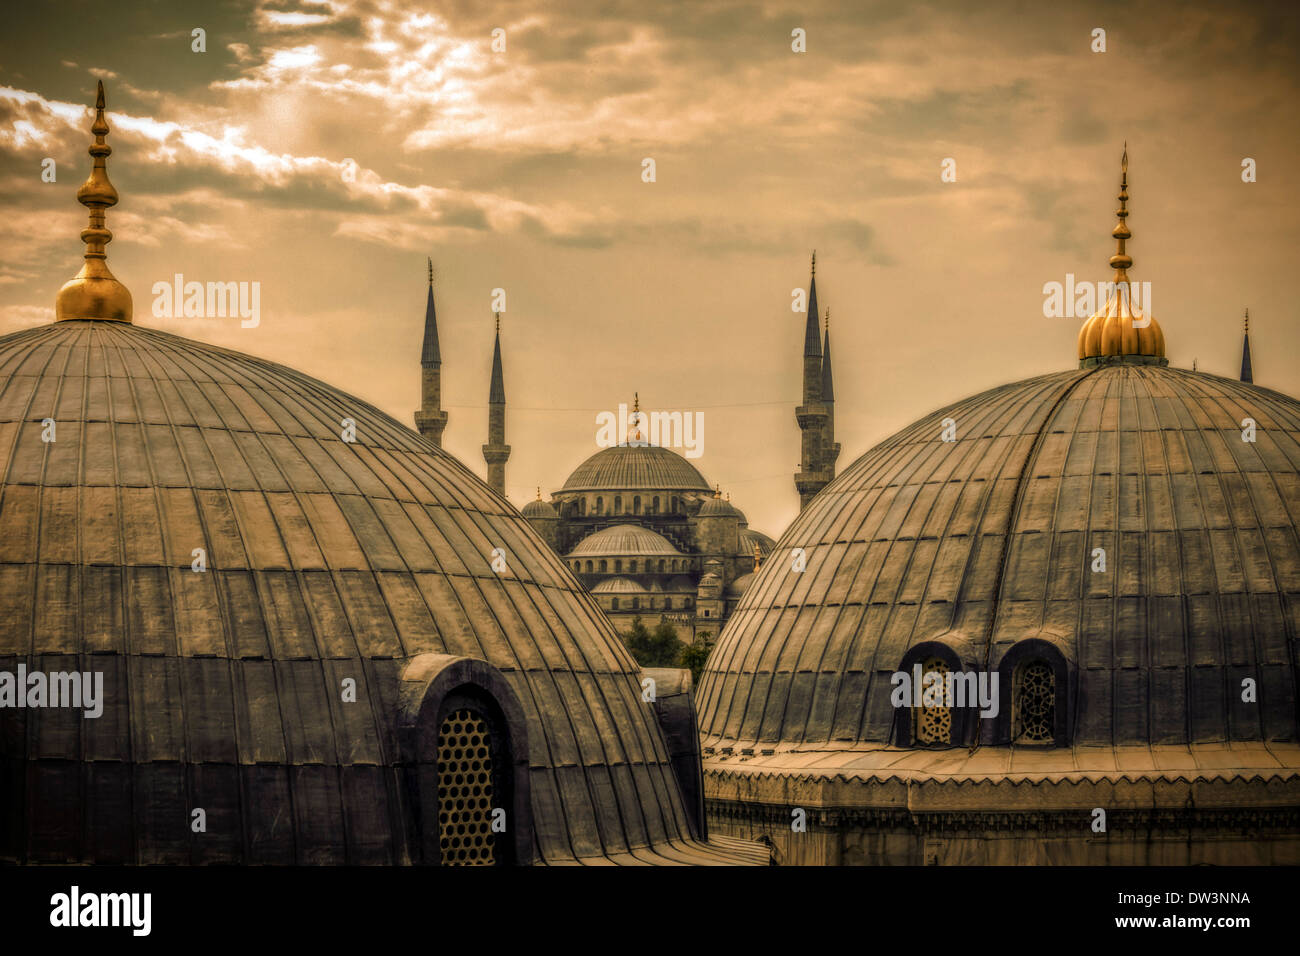 Domes of the Blue mosque in Istanbul Turkey Stock Photo